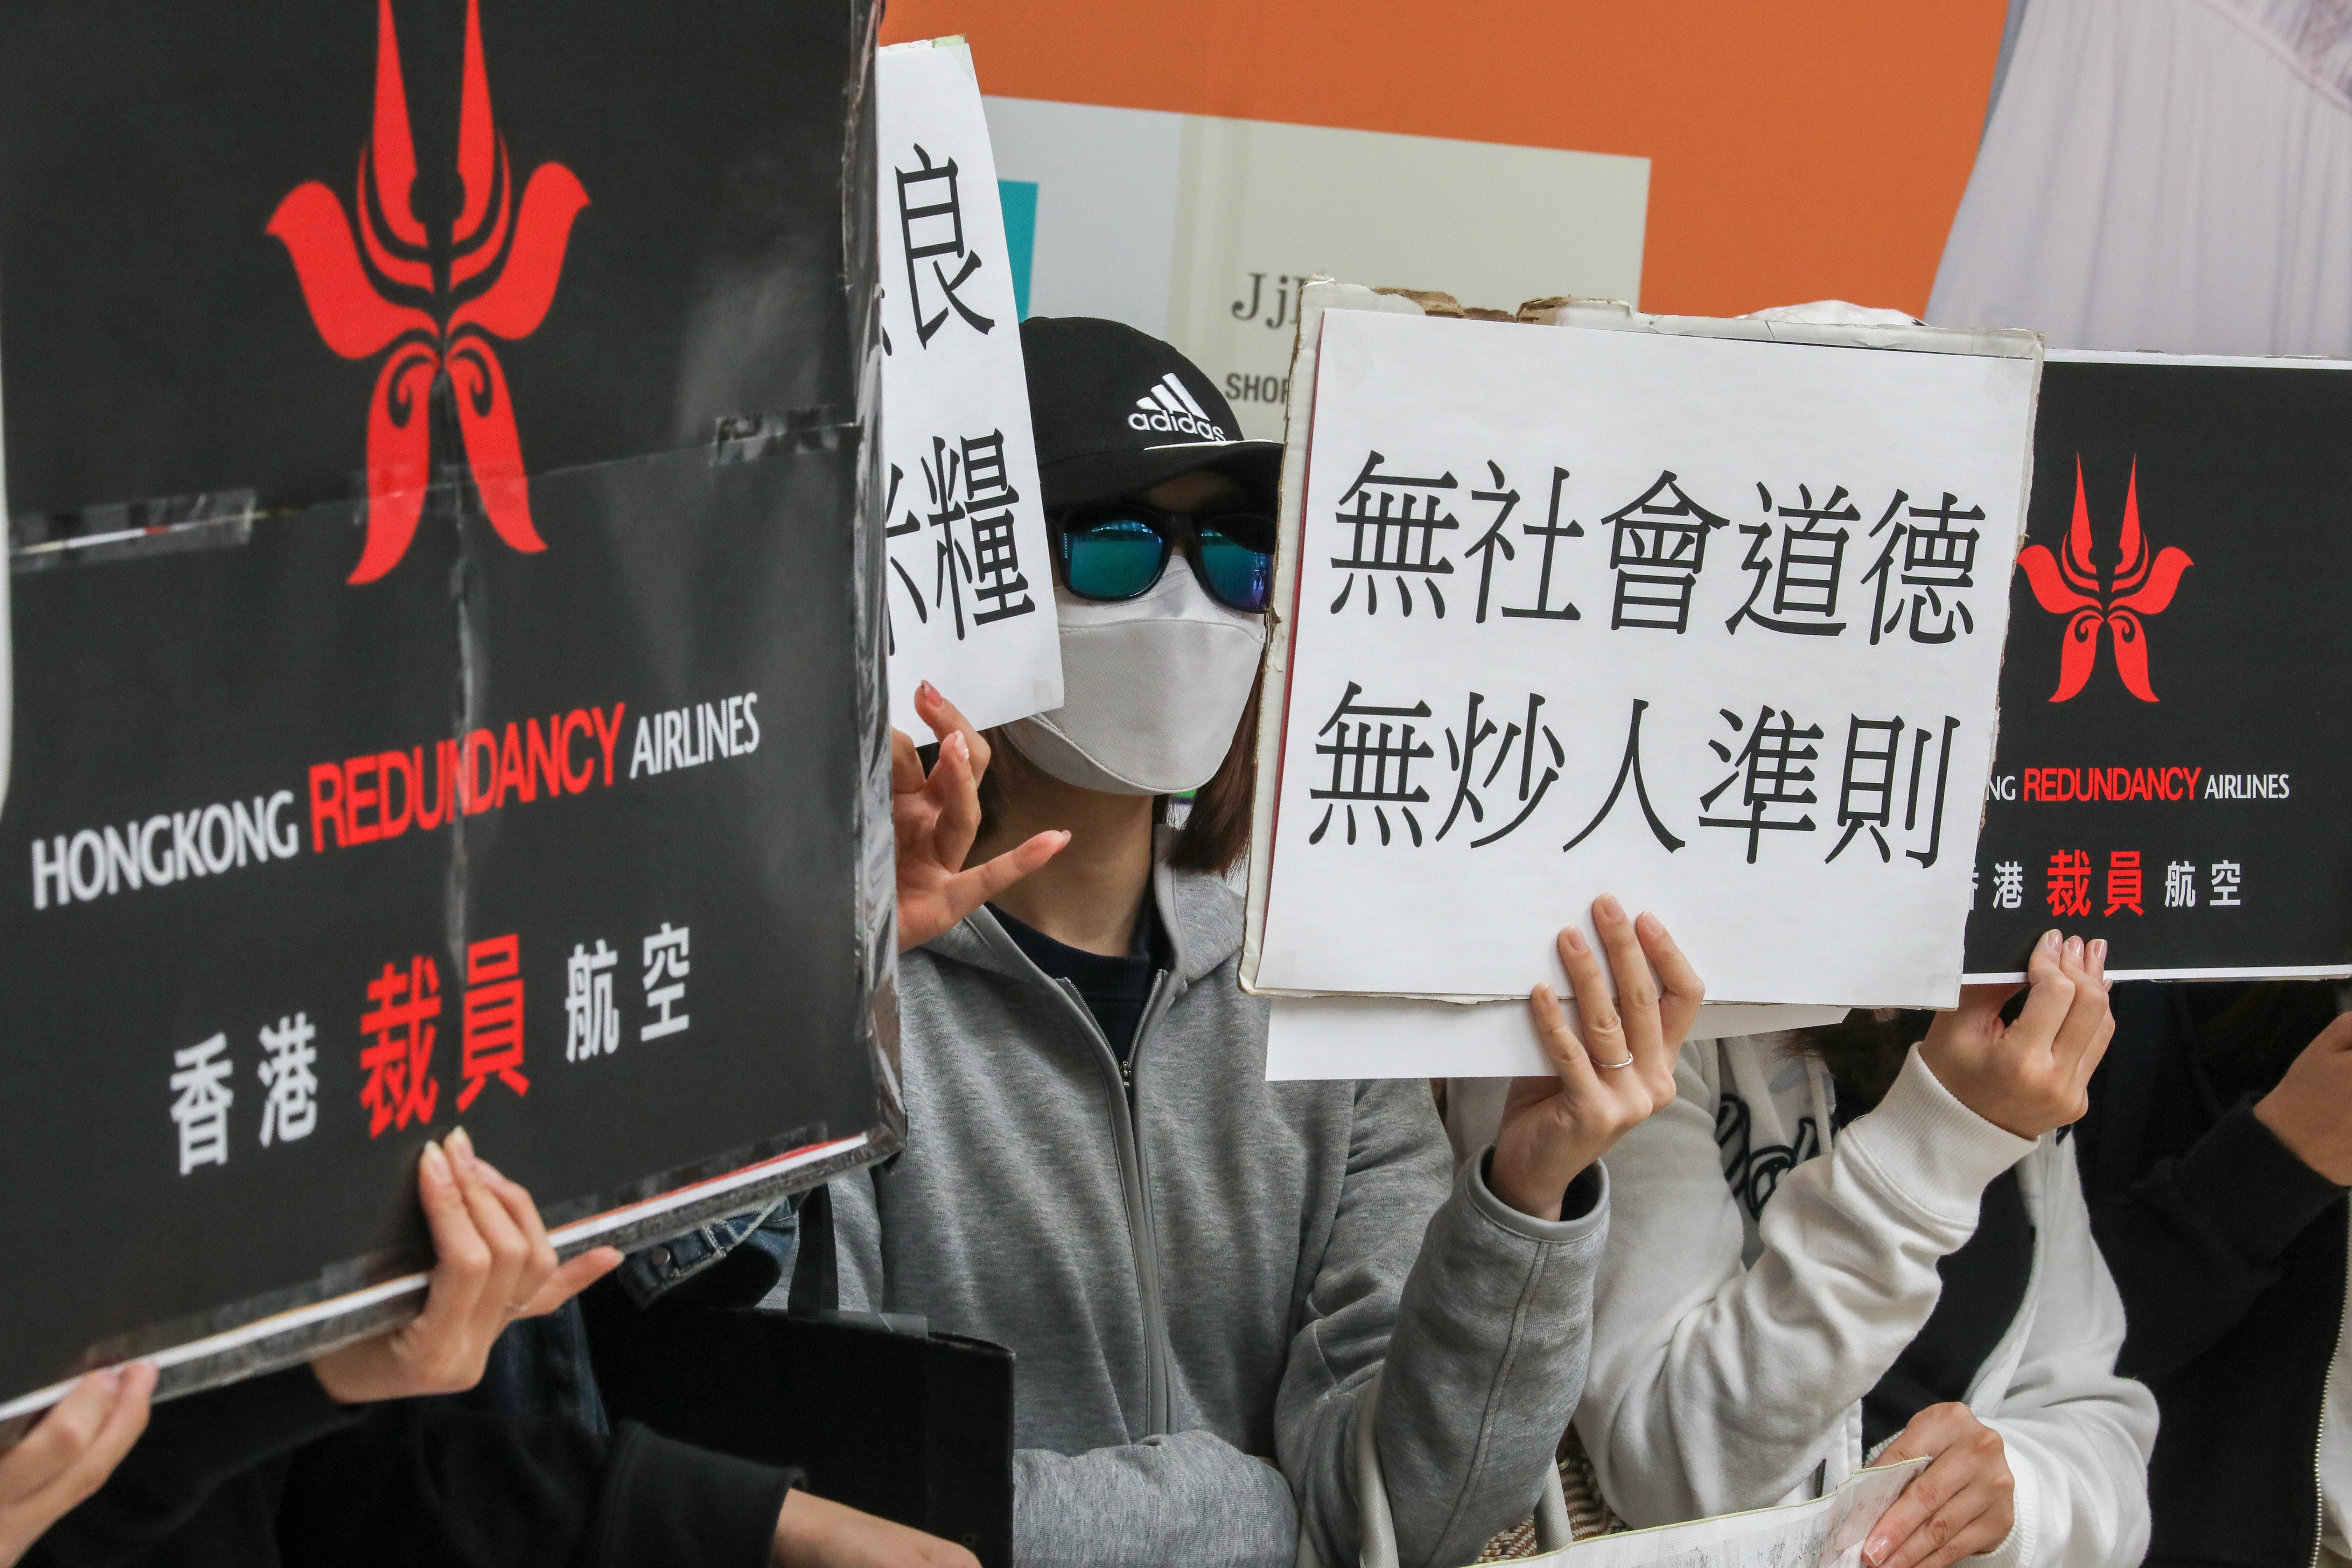 Employees protest outside the office of Hong Kong Airlines on February 19. Photo: Dickson Lee